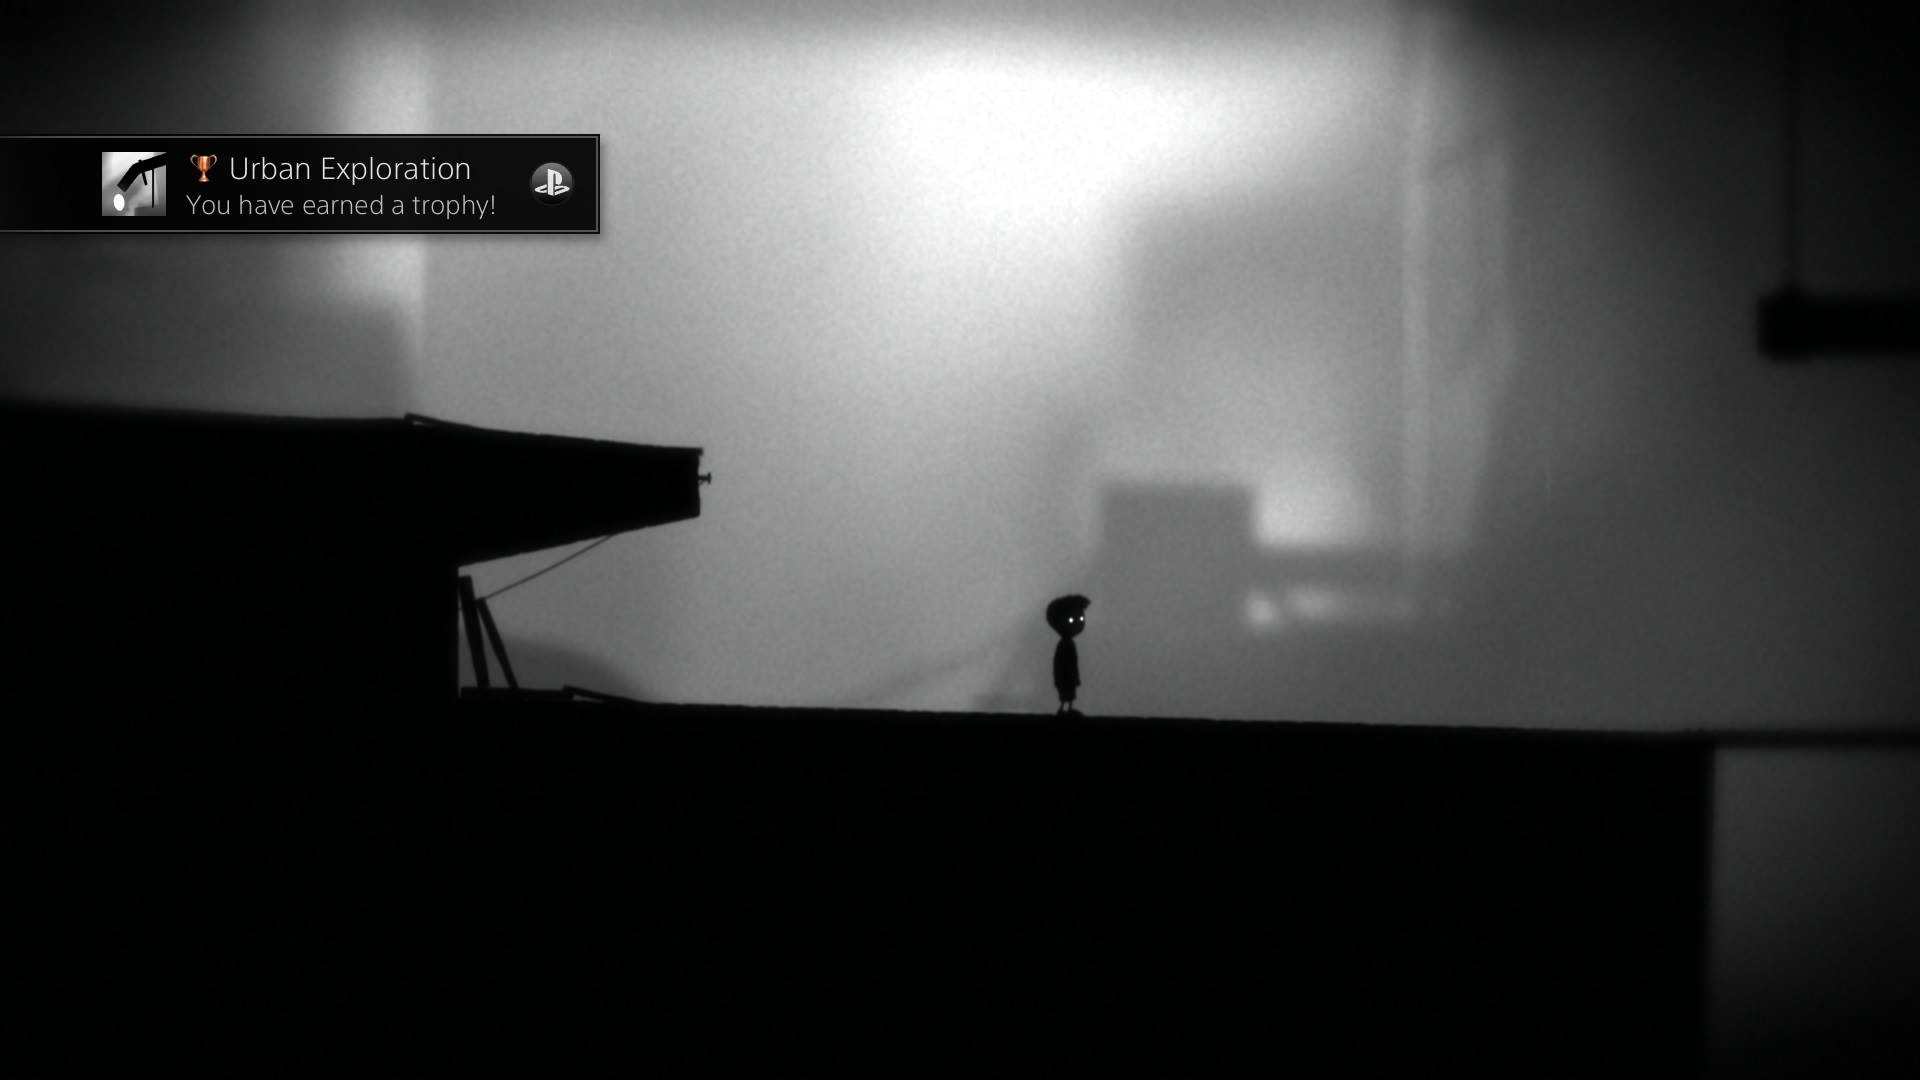 A screenshot of 'Limbo' for the Playstation 4